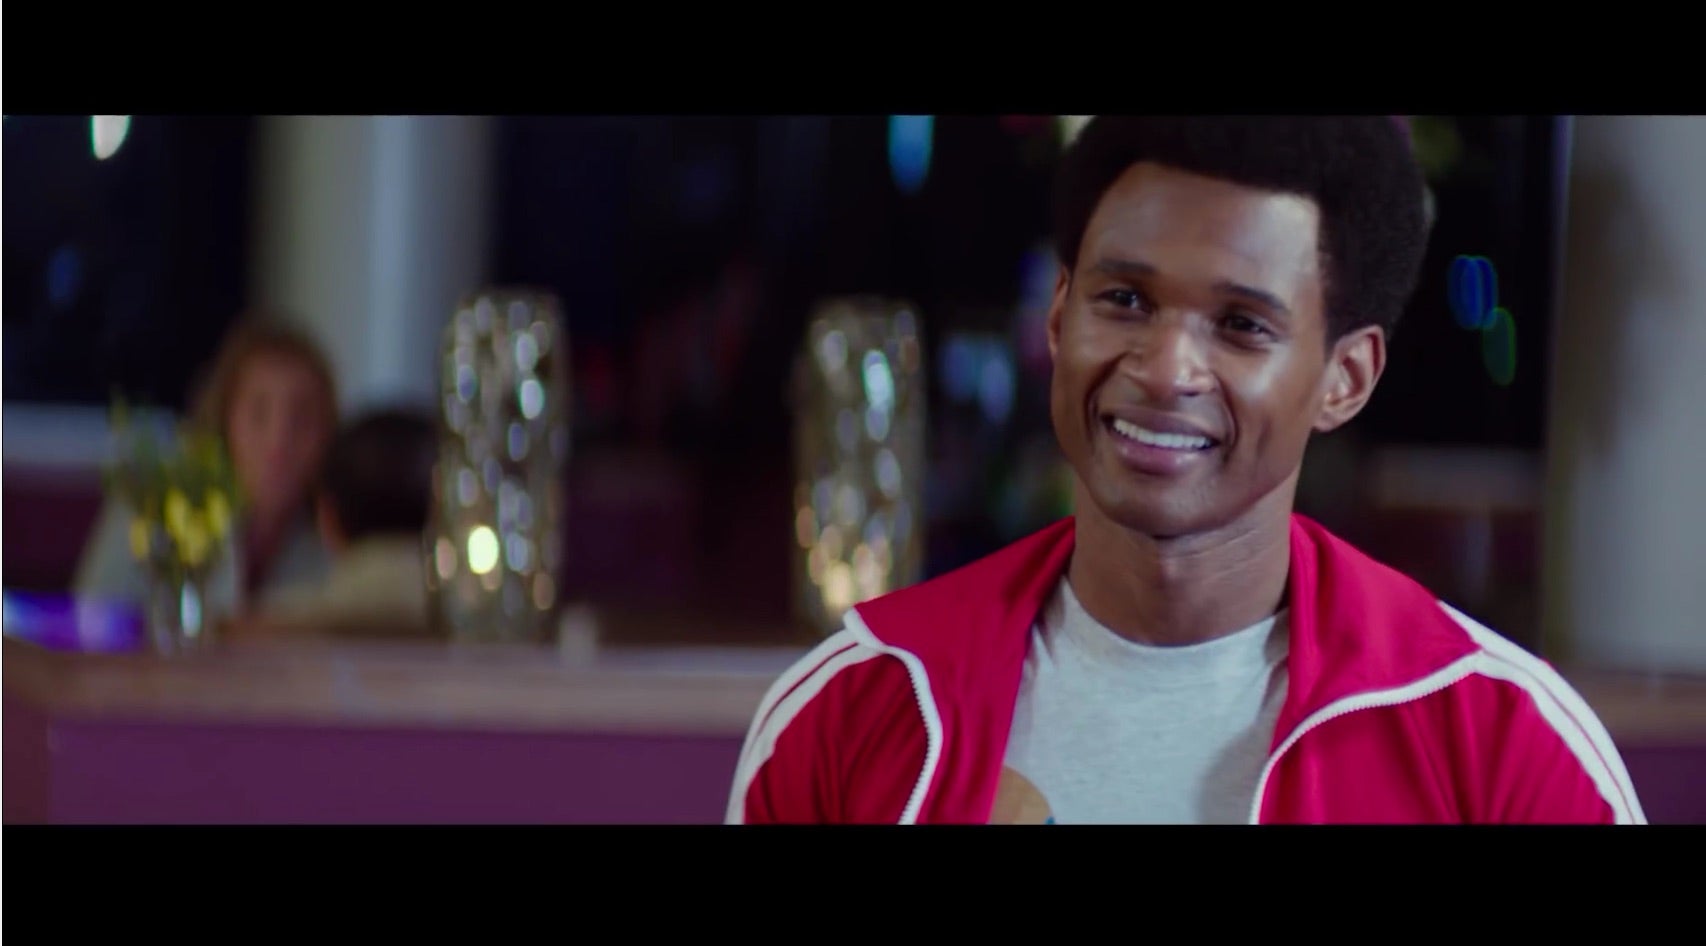 Here's A First Look At Usher As Sugar Ray Leonard In The New Trailer For "Hands Of Stone"
